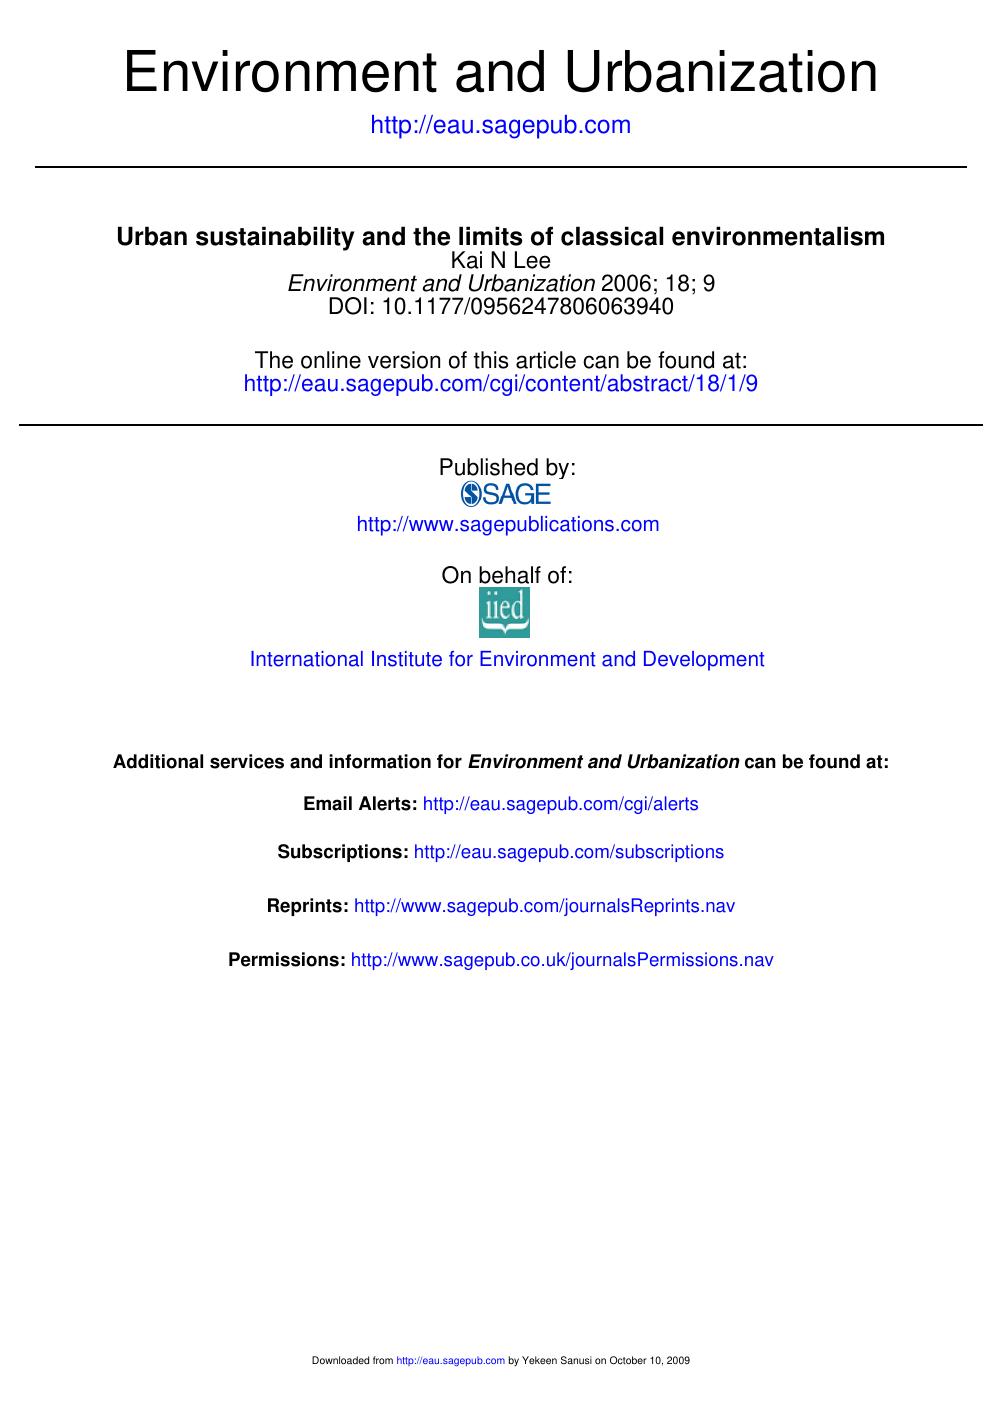 Urban sustainability and the limits of classical environmentalism. 2006